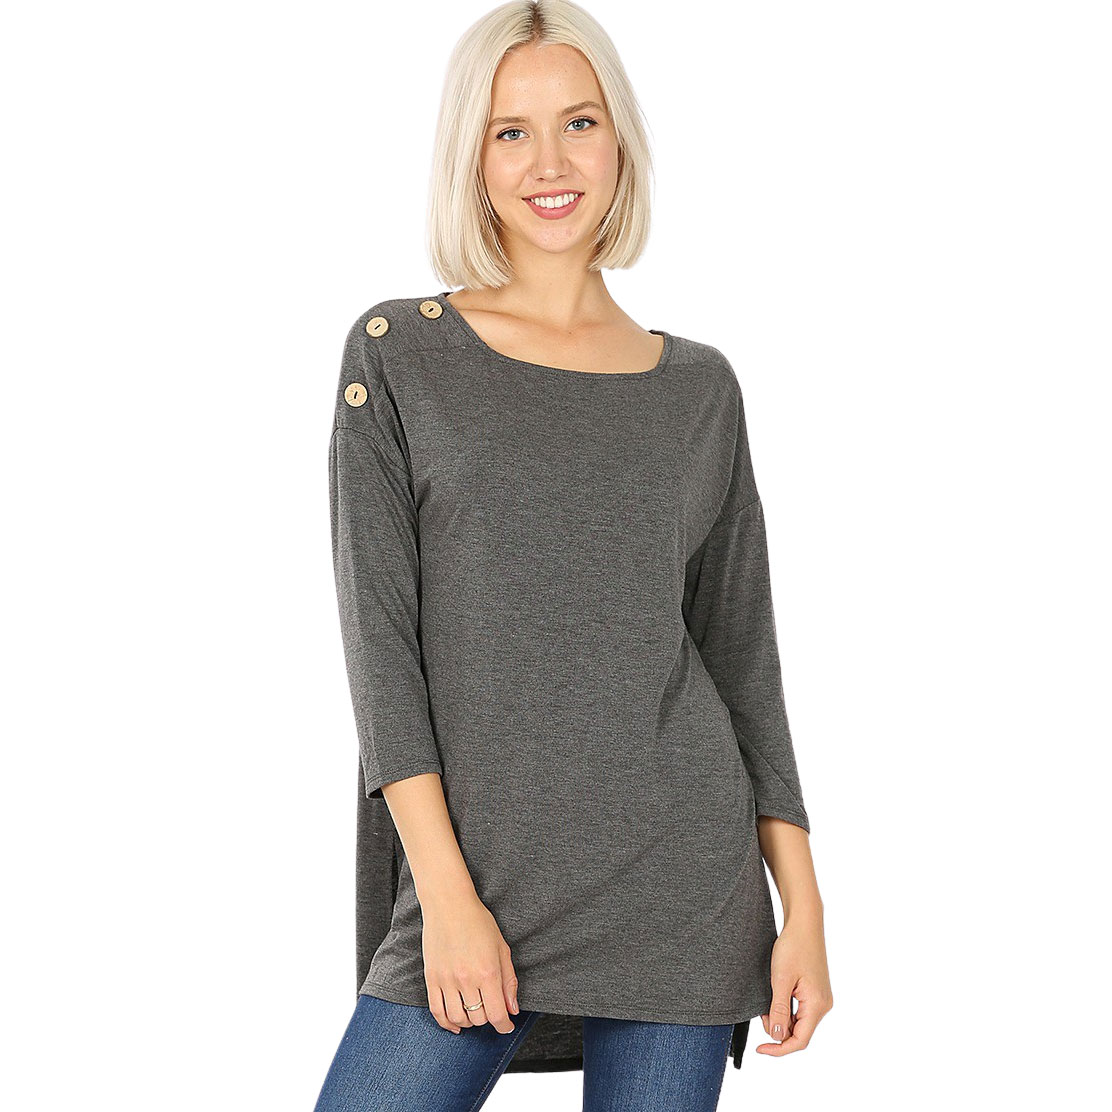 2082 - Boat Neck Hi-Lo Tops w/Wooden Buttons LIGHT GREY Boat Neck Hi-Lo Top w/ Wooden Buttons 2082 - Small